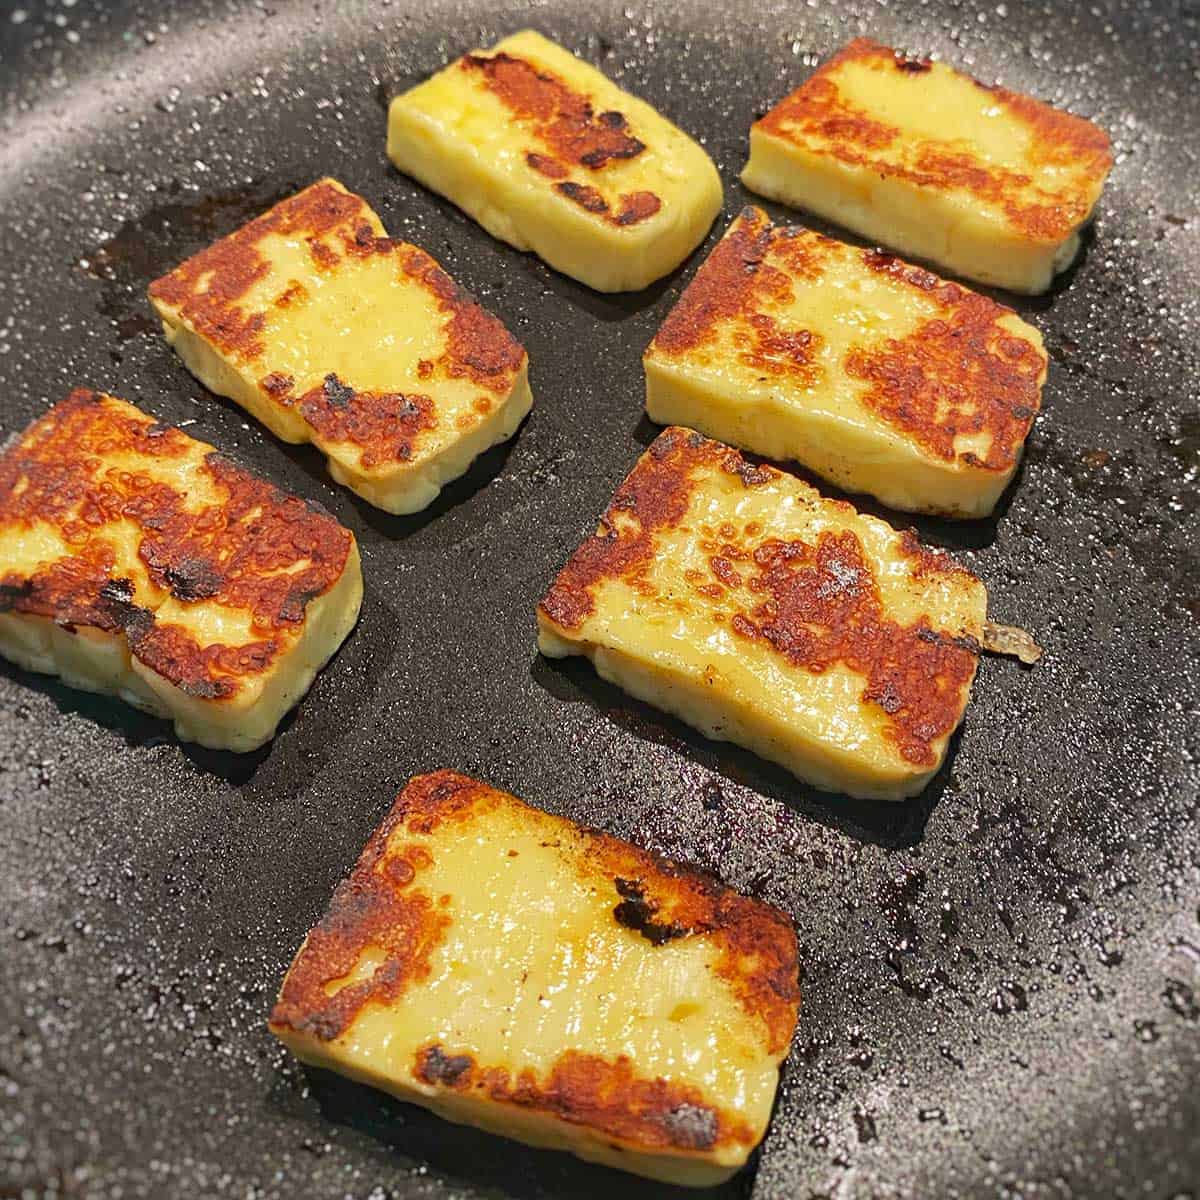 Haloumi cooking in a frying pan.